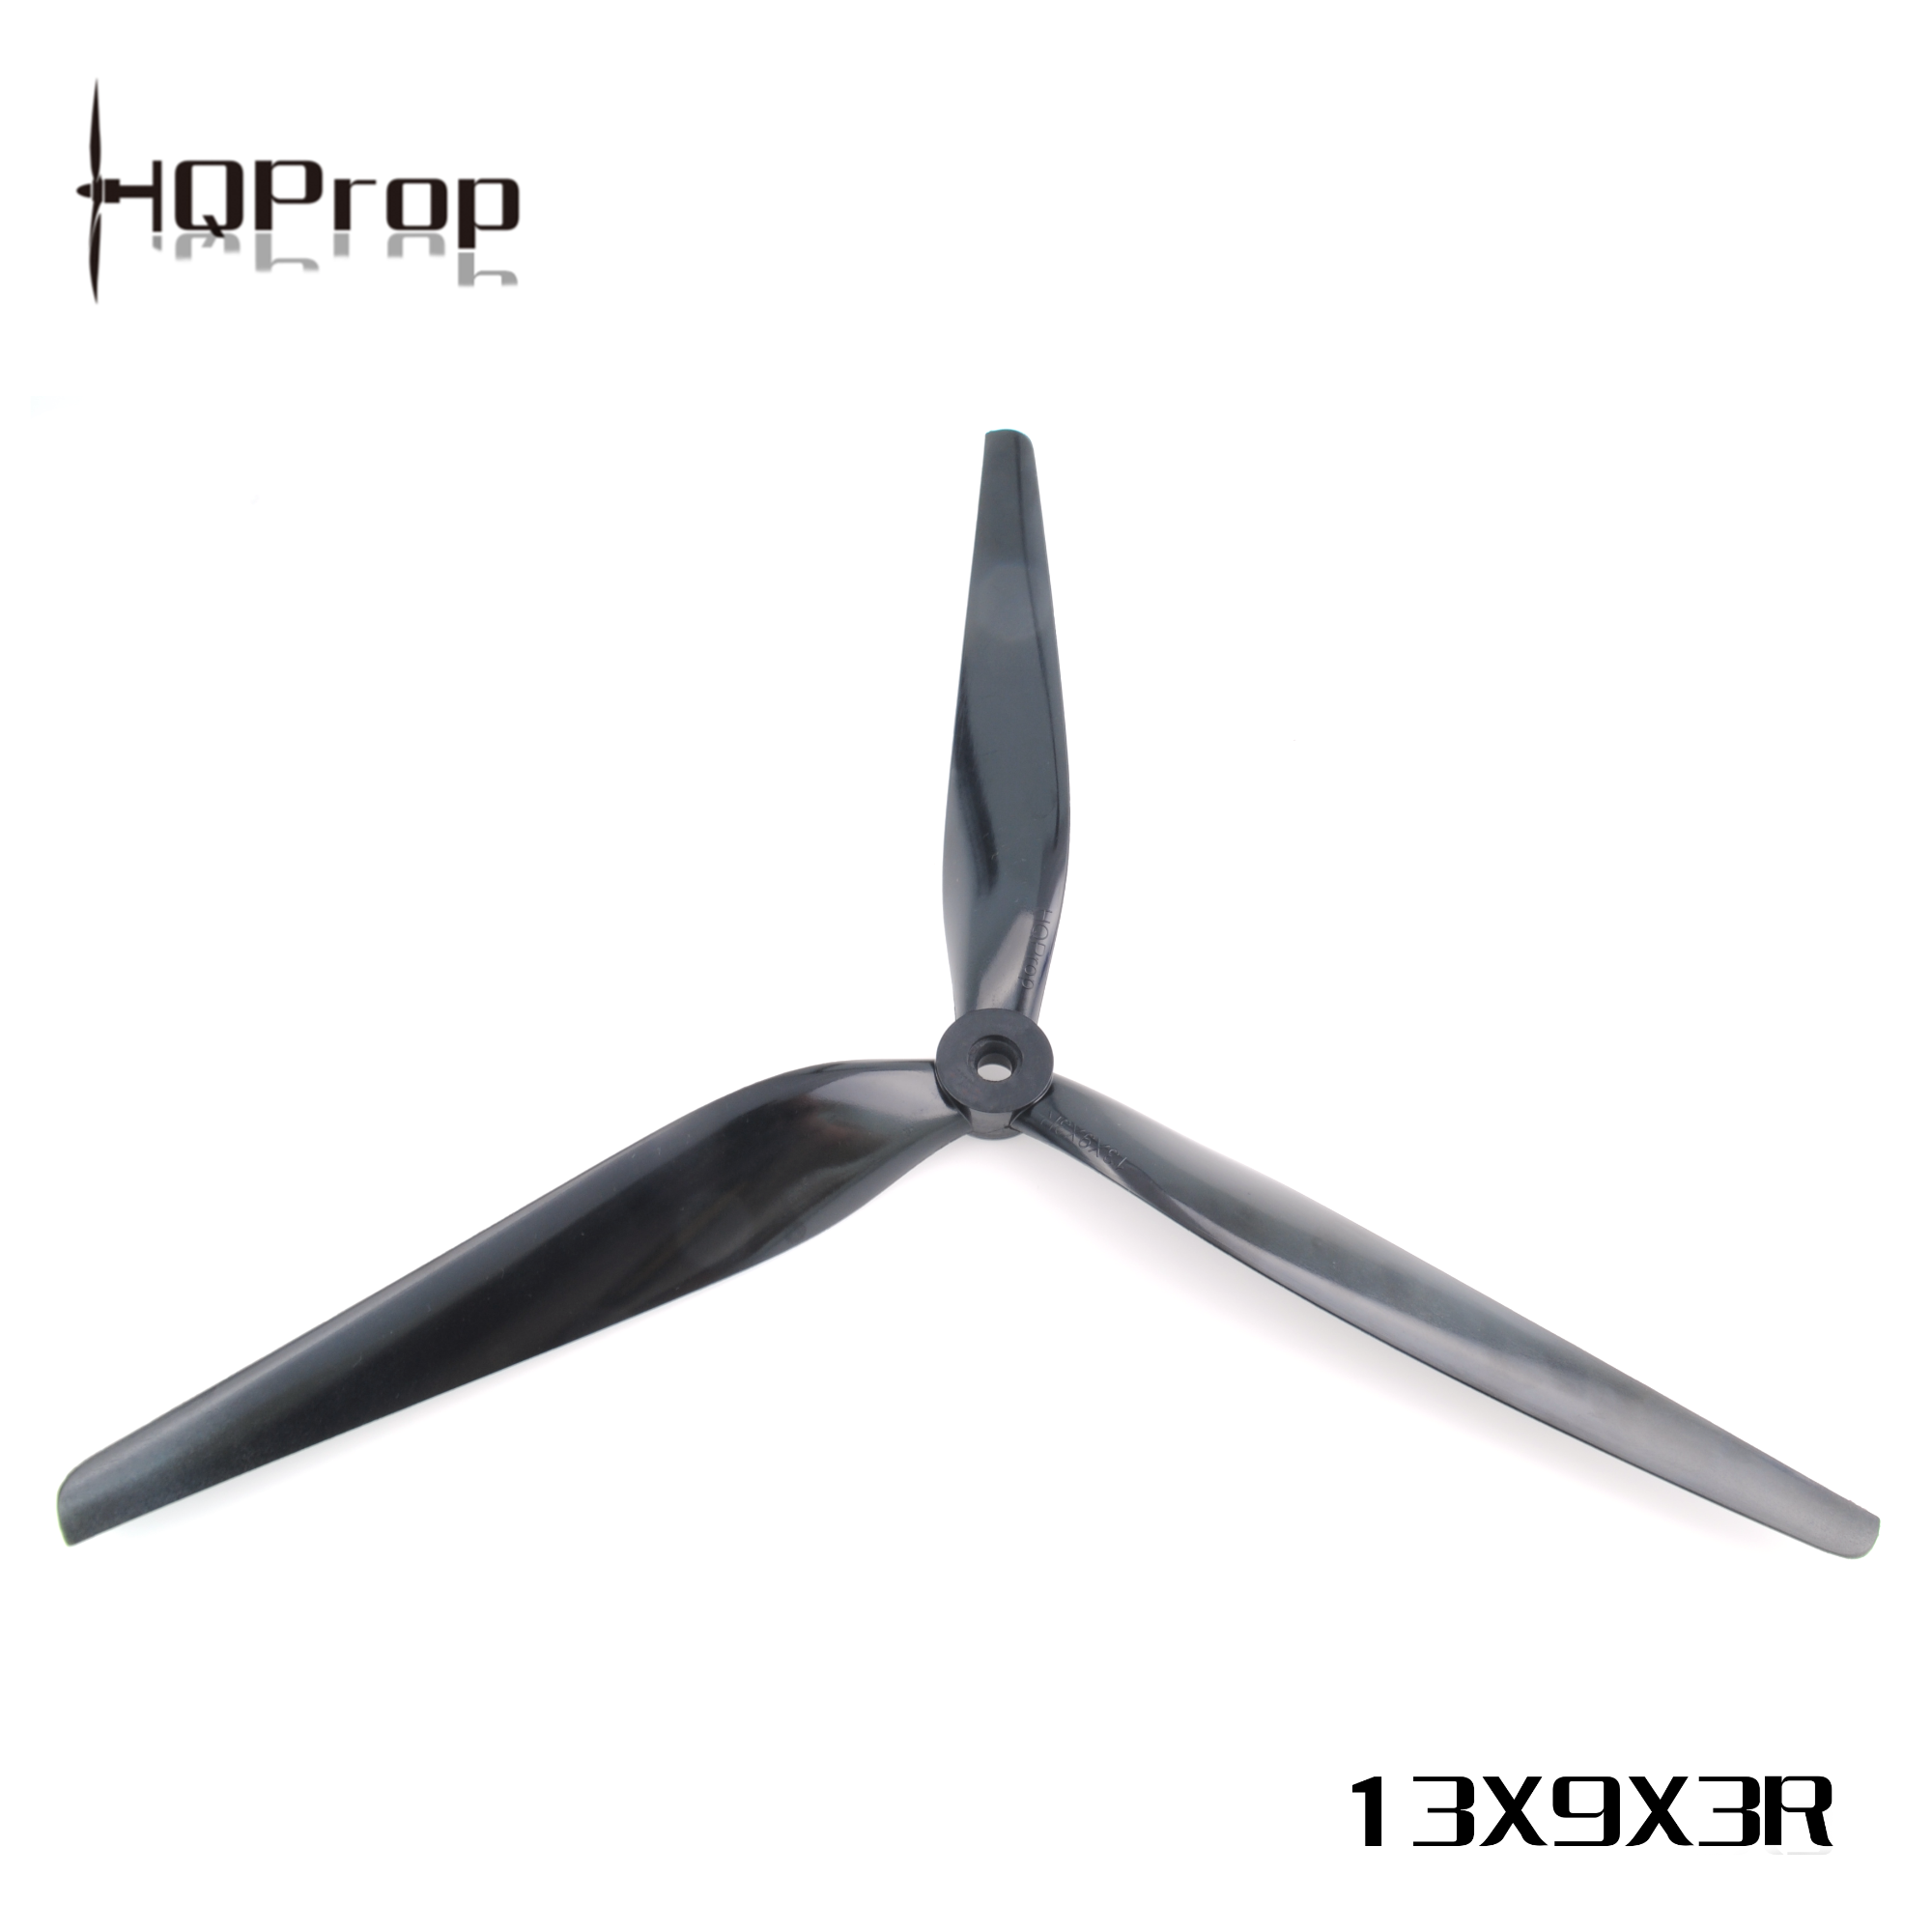 HQProp X-Class Prop 13 Inch 3-blade 13X9X3R(CW) Black-Carbon Reinforced Nylon for RC Multirotor Multicopter